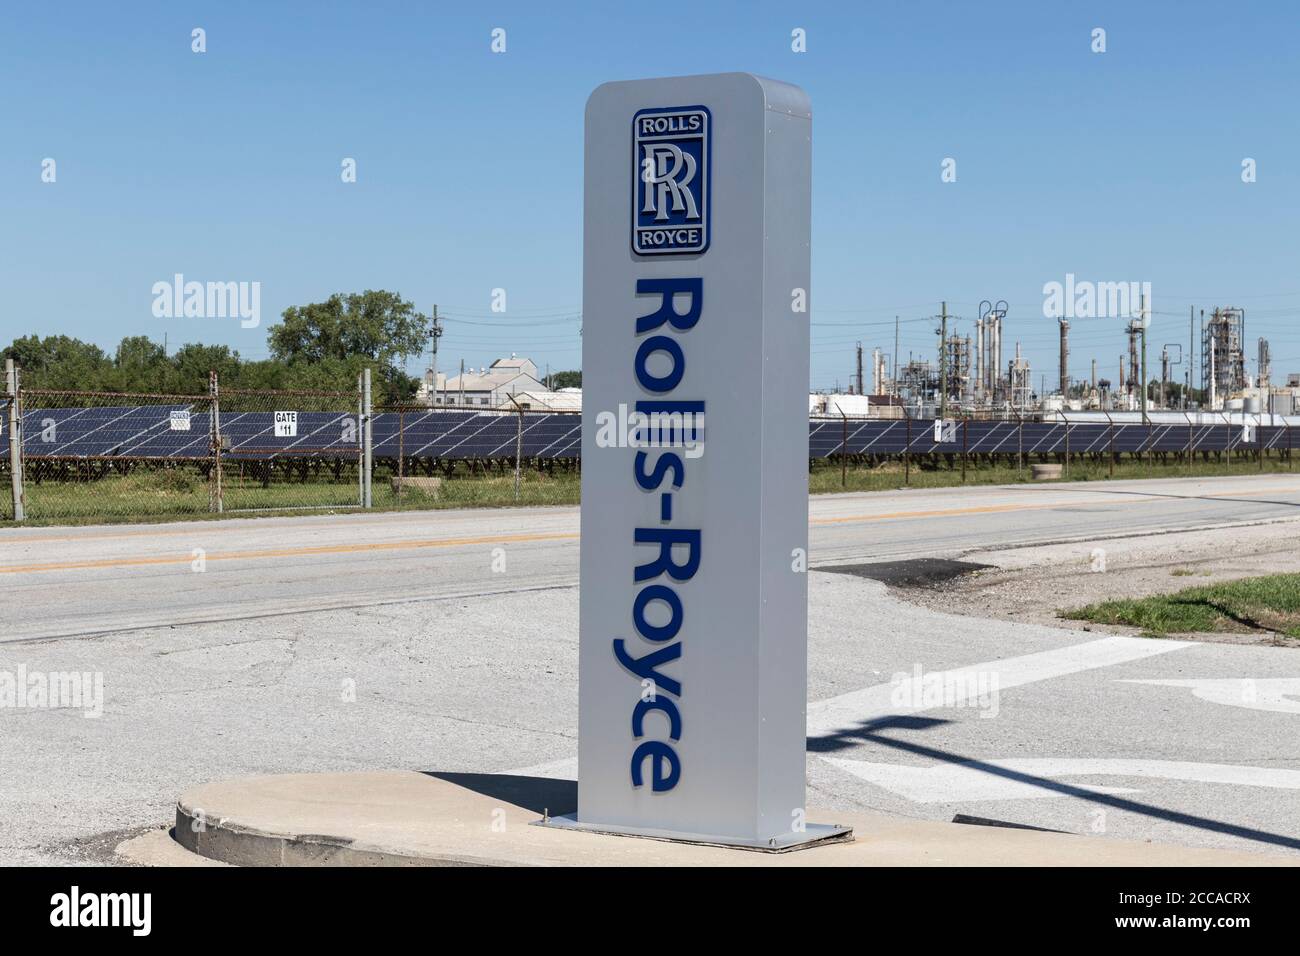 Indianapolis - Circa August 2020: Rolls-Royce LibertyWorks plant. Rolls-Royce is a Global Company Providing Jet and Gas Turbine Engines. Stock Photo